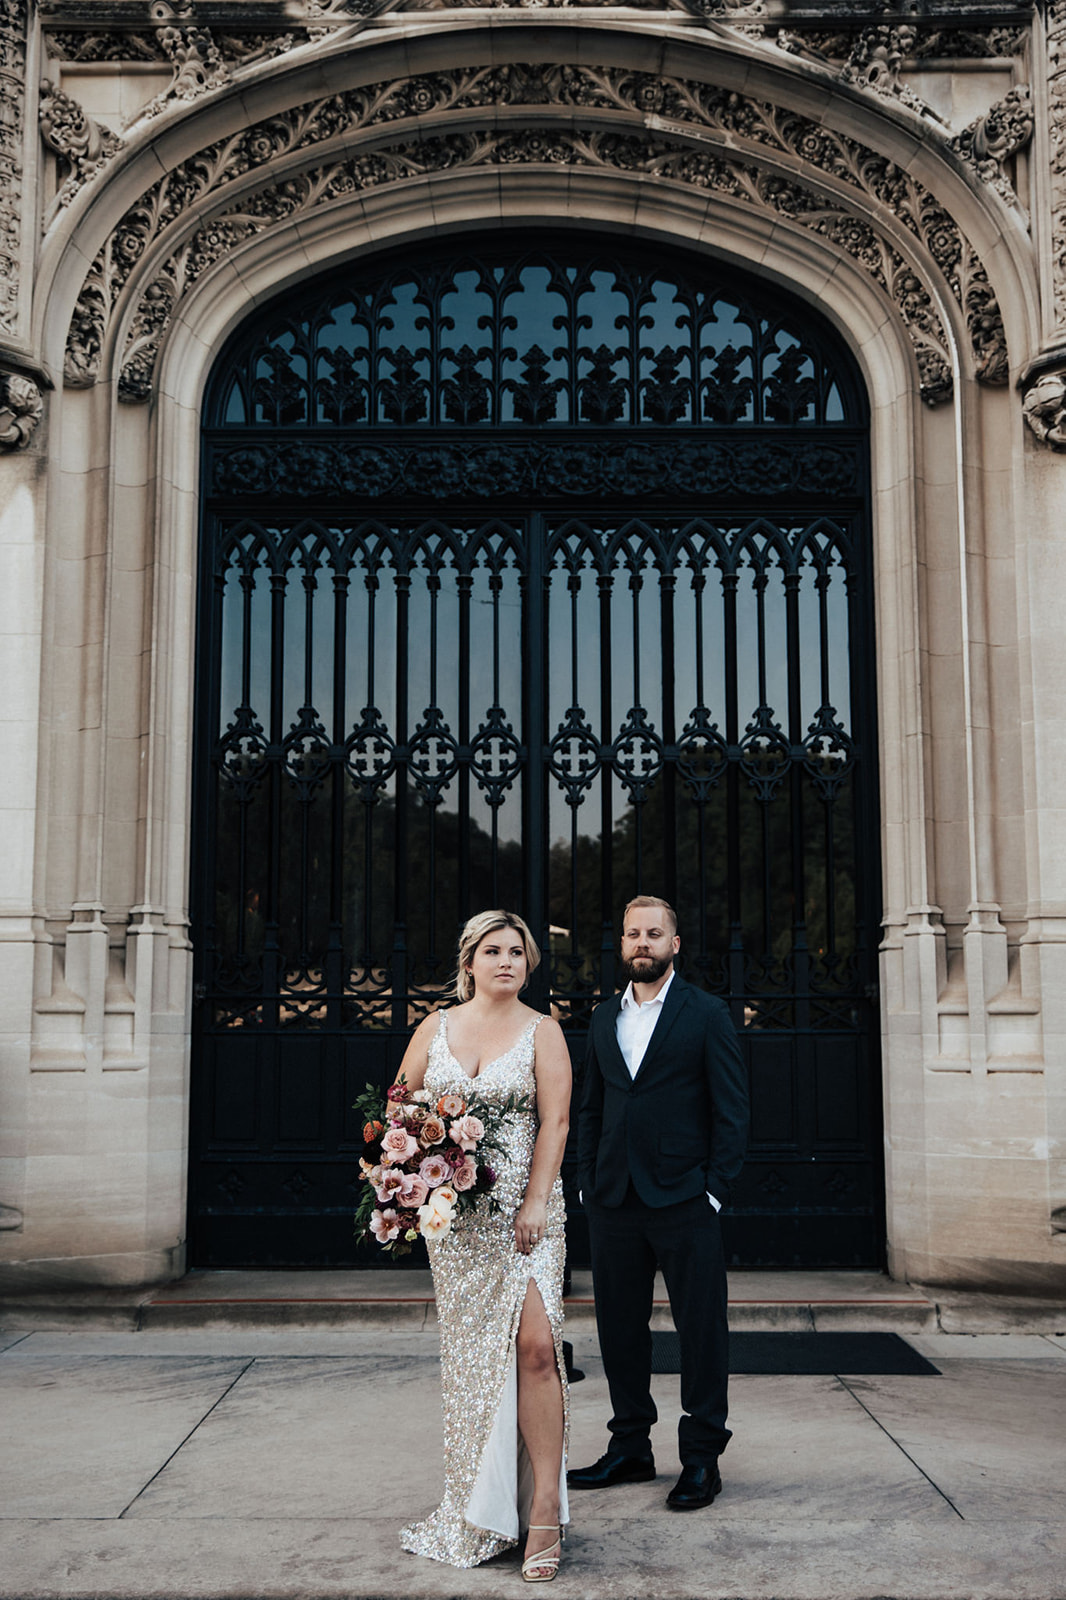 Couple in evening attire standing in front of black gate at Biltmore estate for anniversary photos